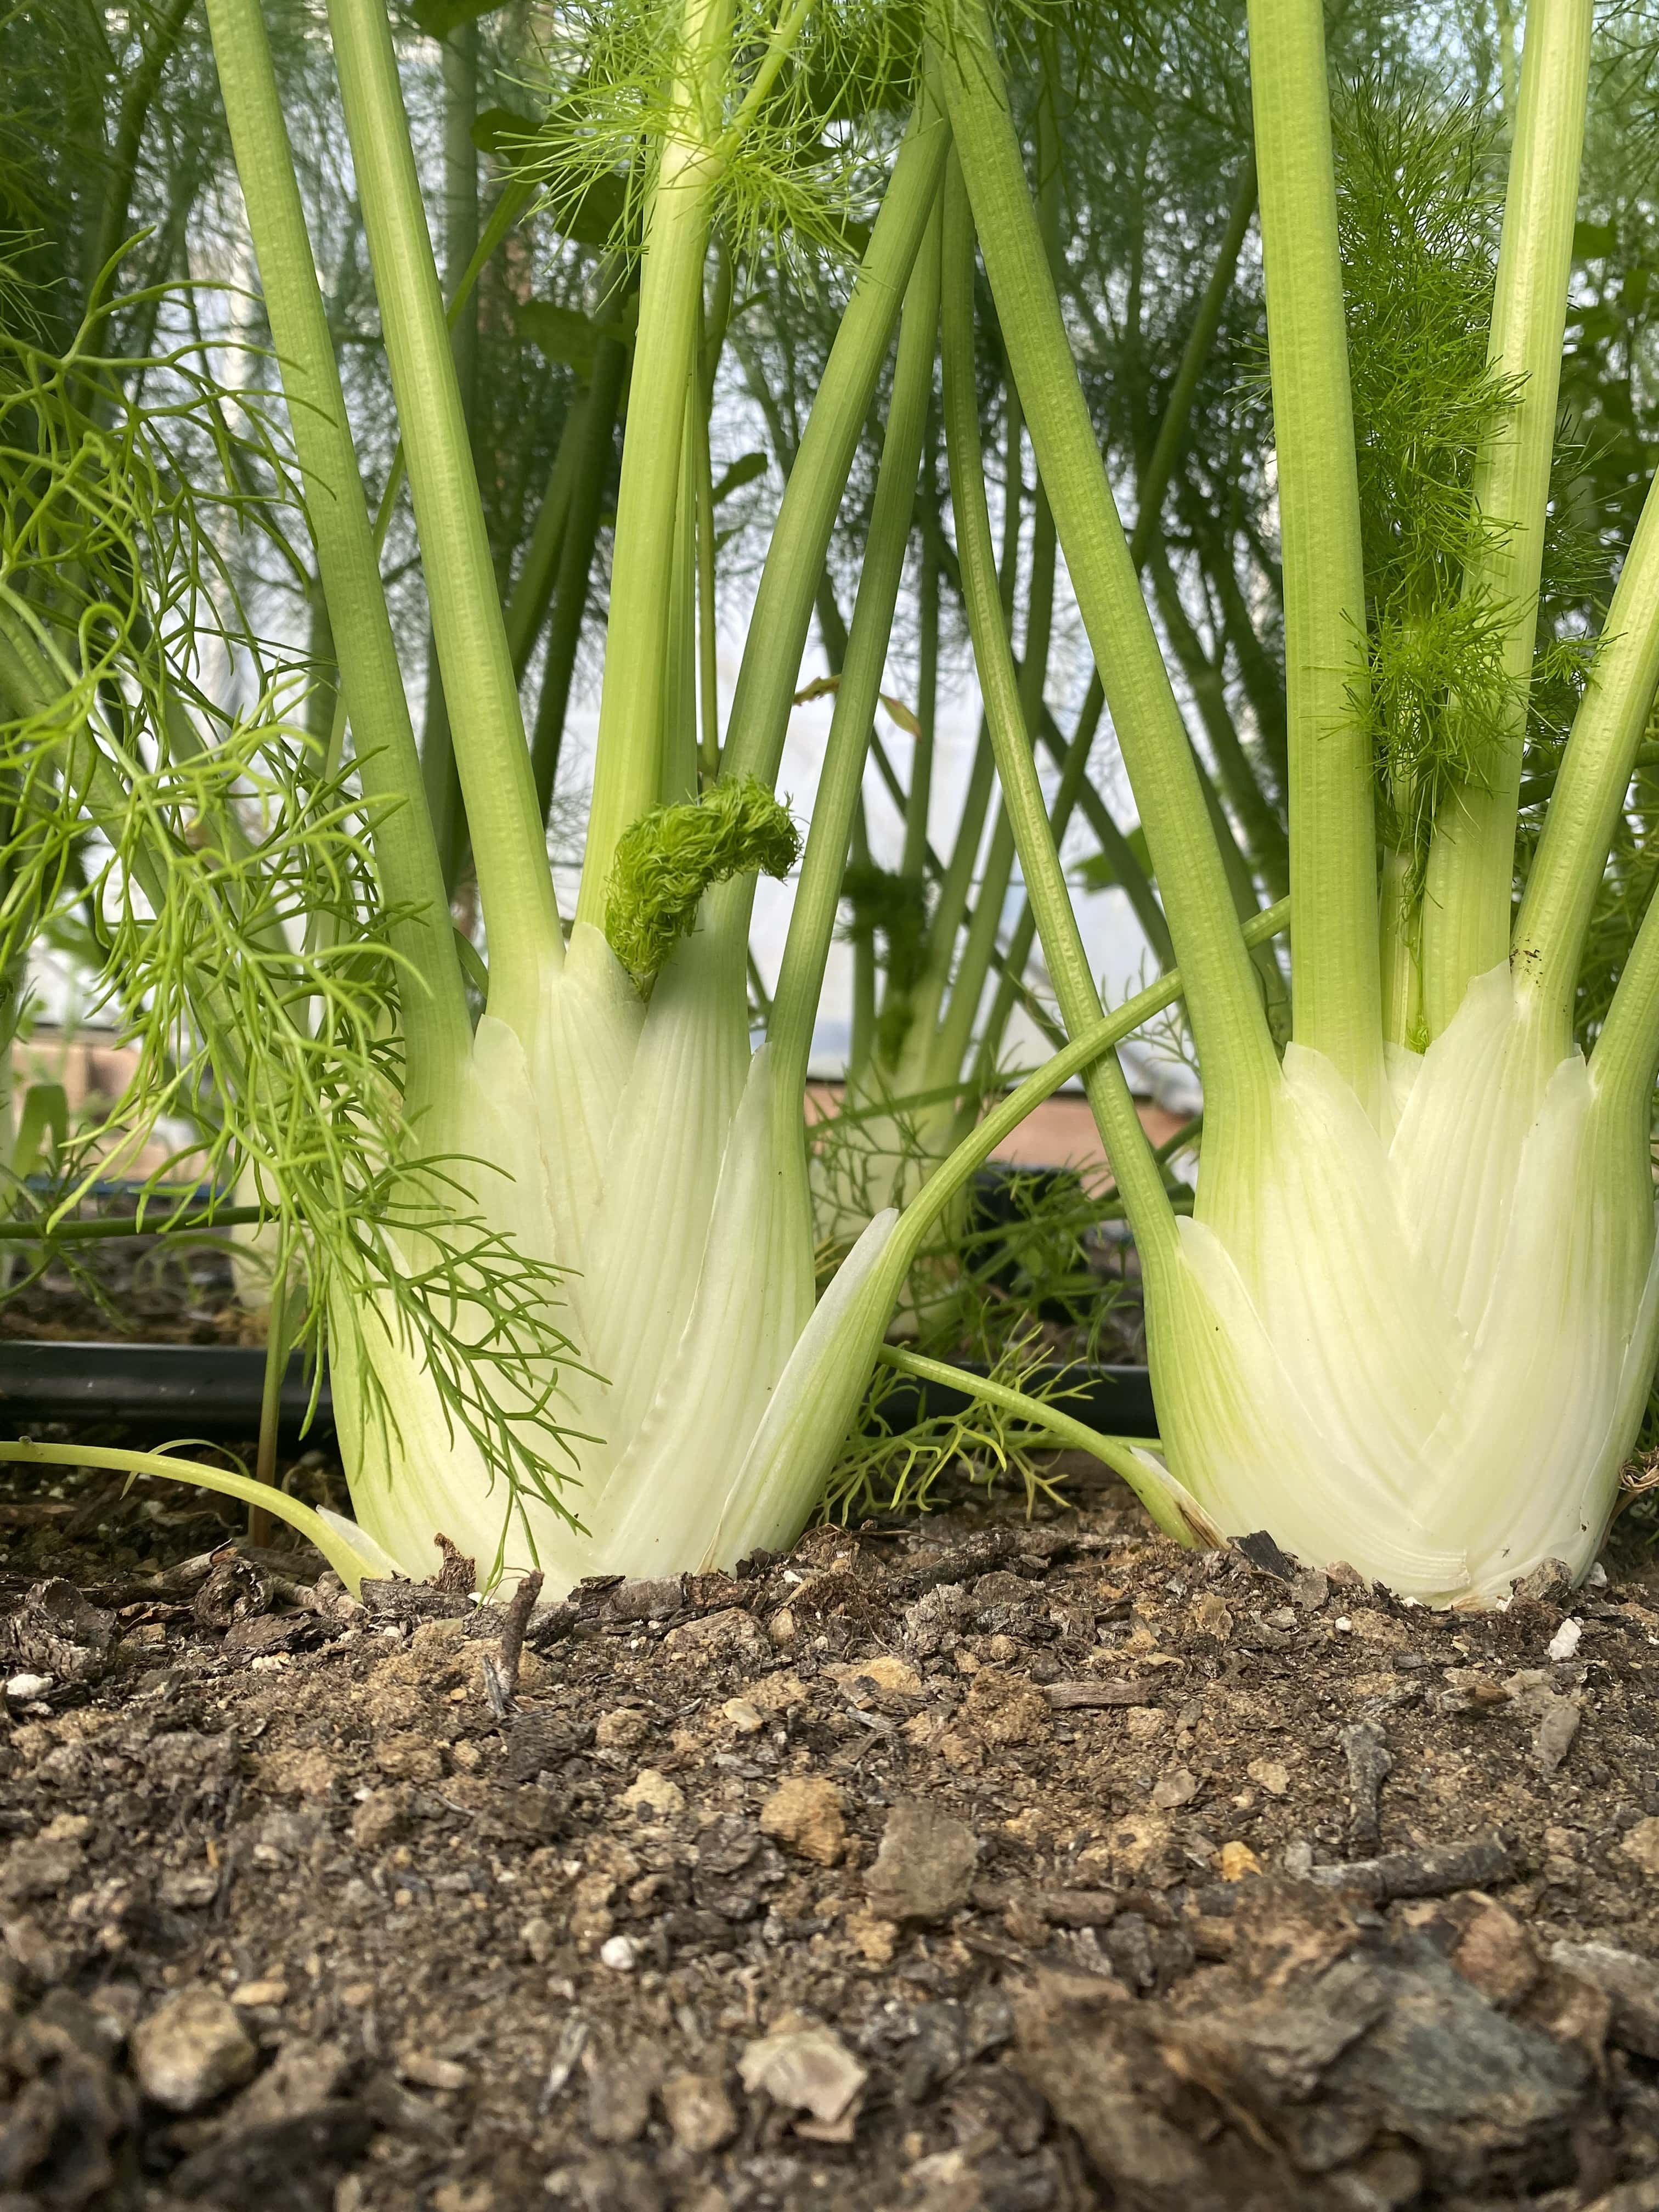 2 fennel bulbs growing up from the ground